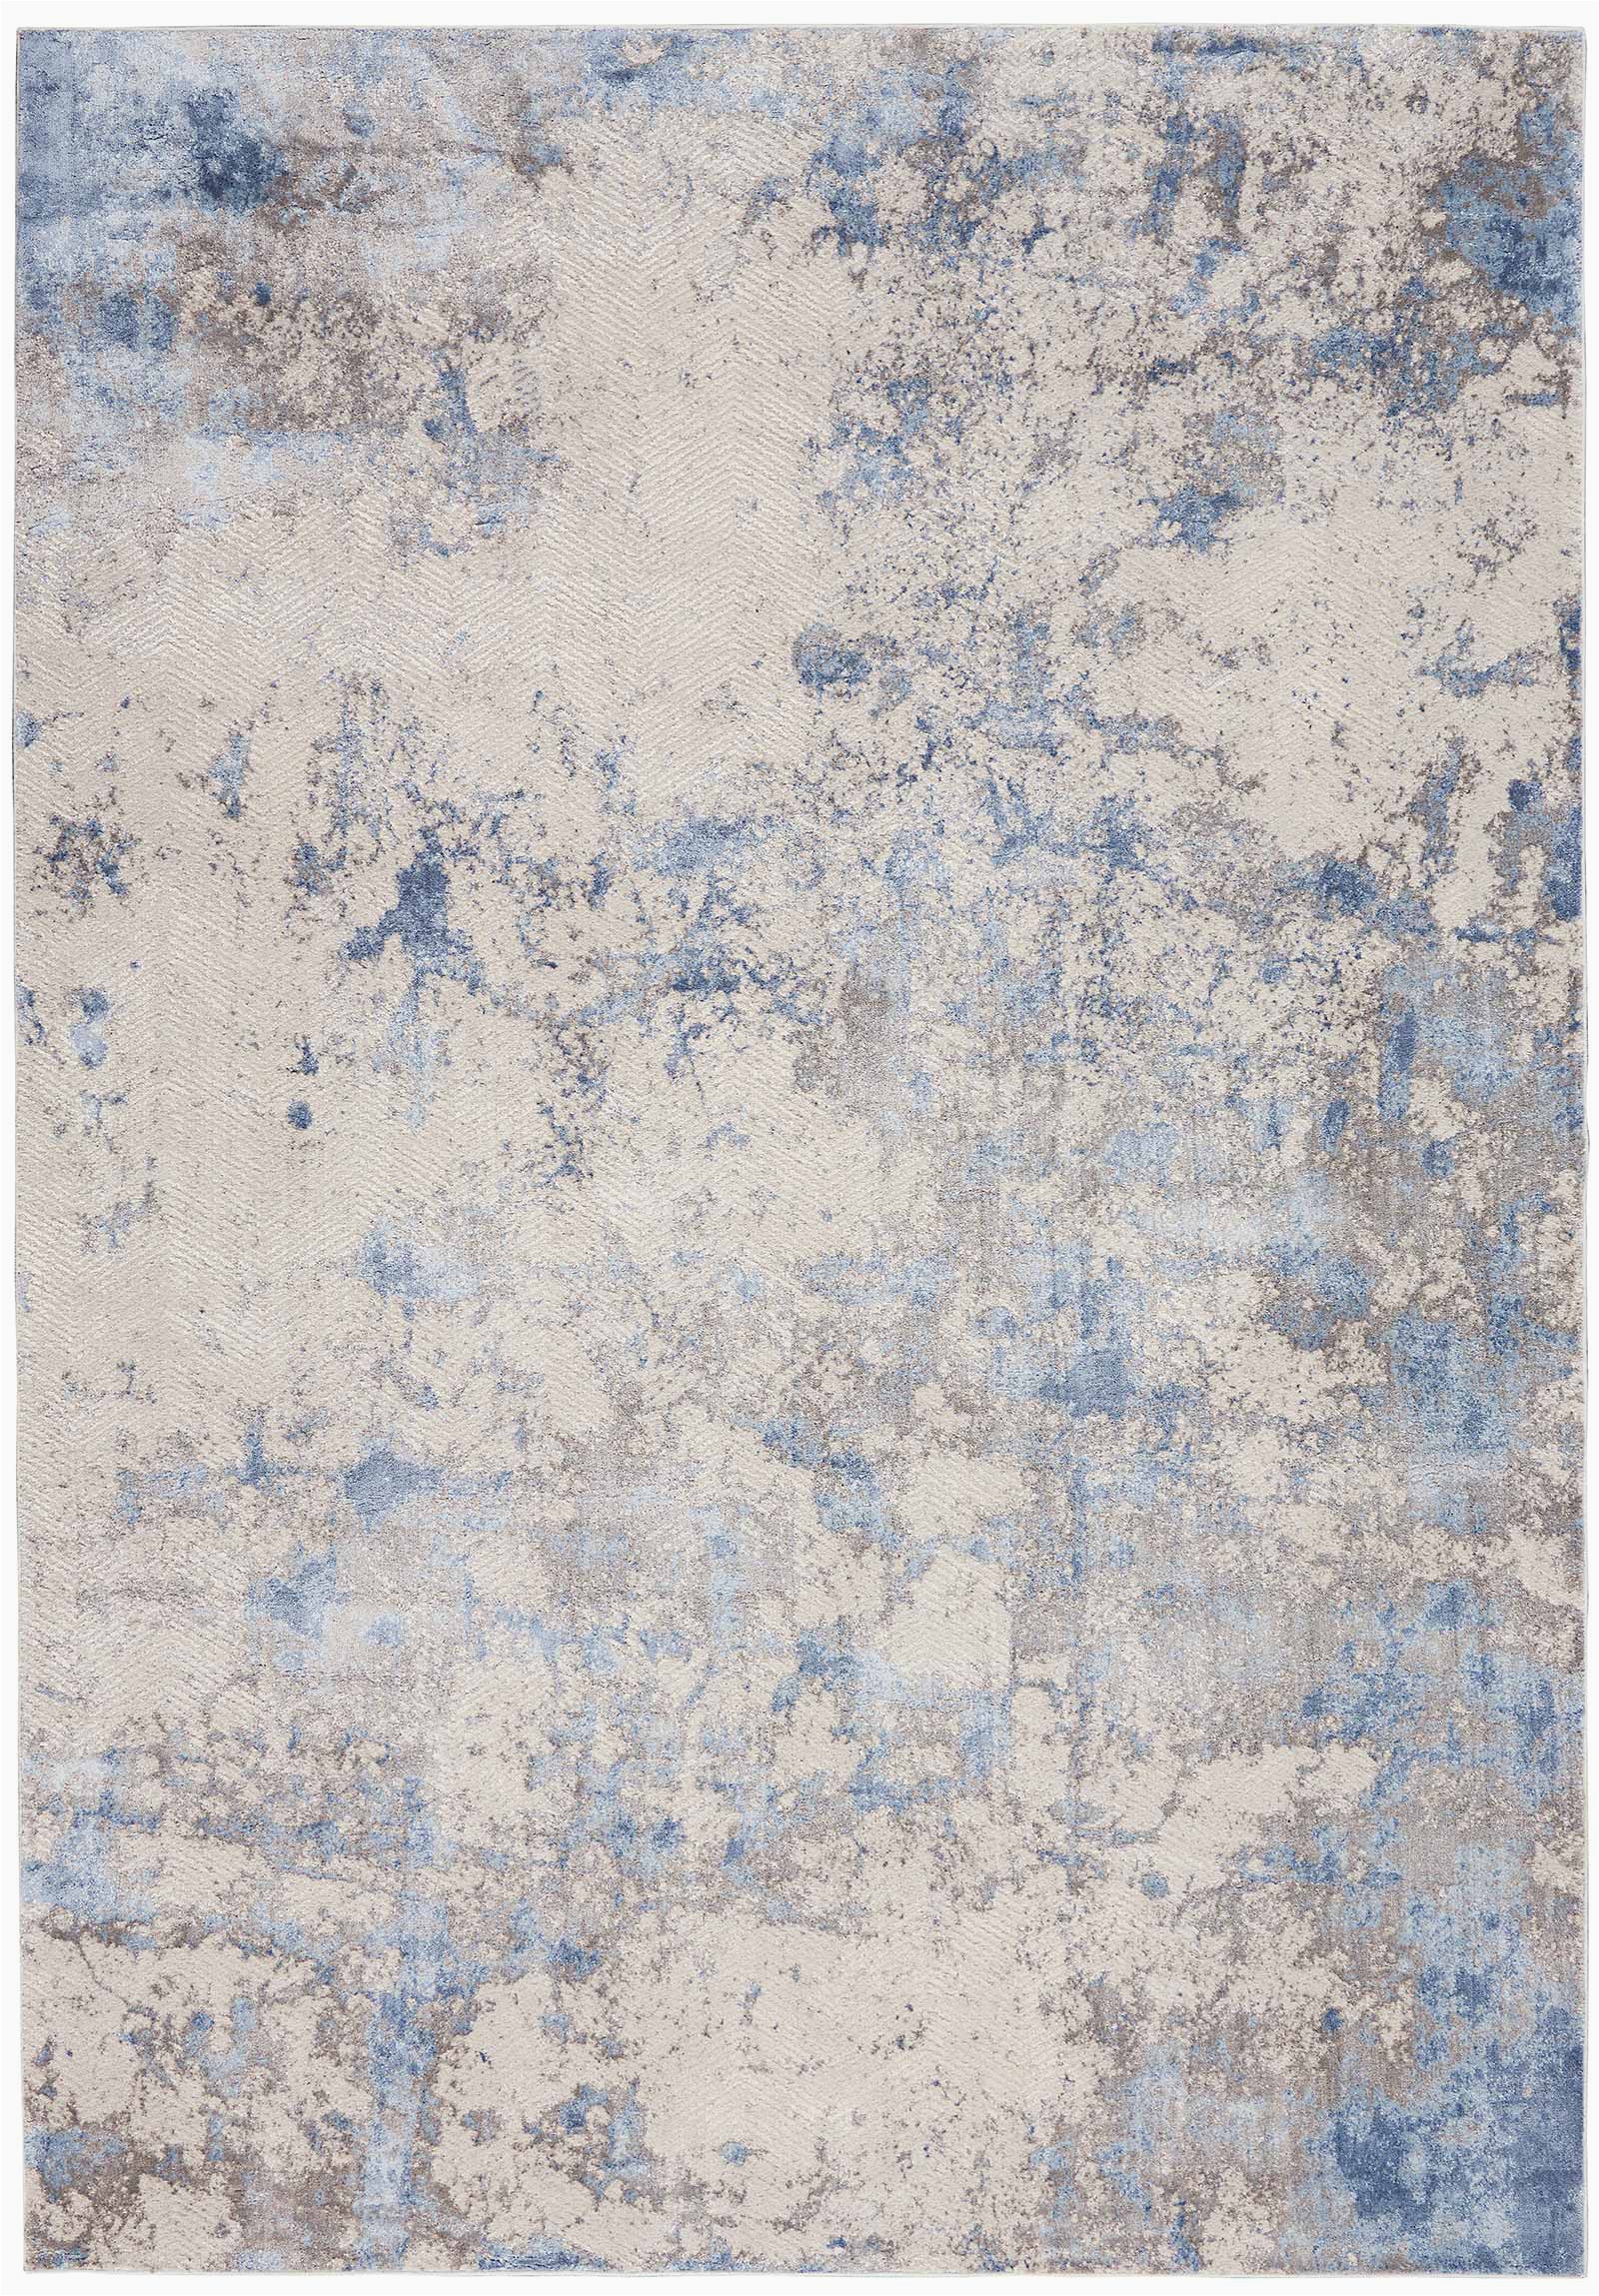 Rugs Blue and Gray Nourison Silky Textures Sly04 Blue Ivory Grey